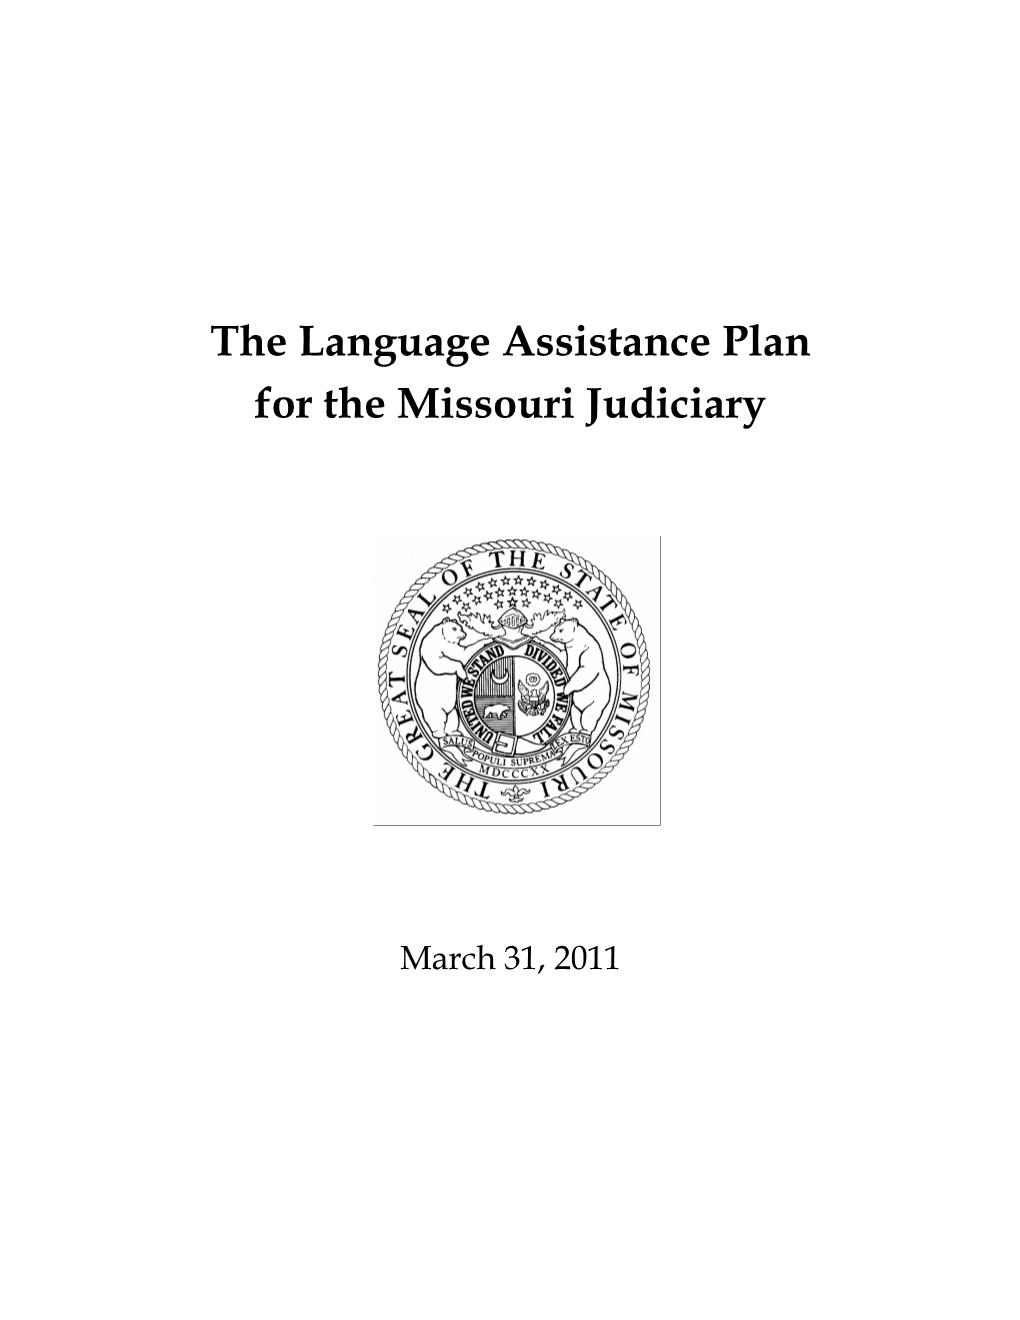 The Language Assistance Plan for the Missouri Judiciary